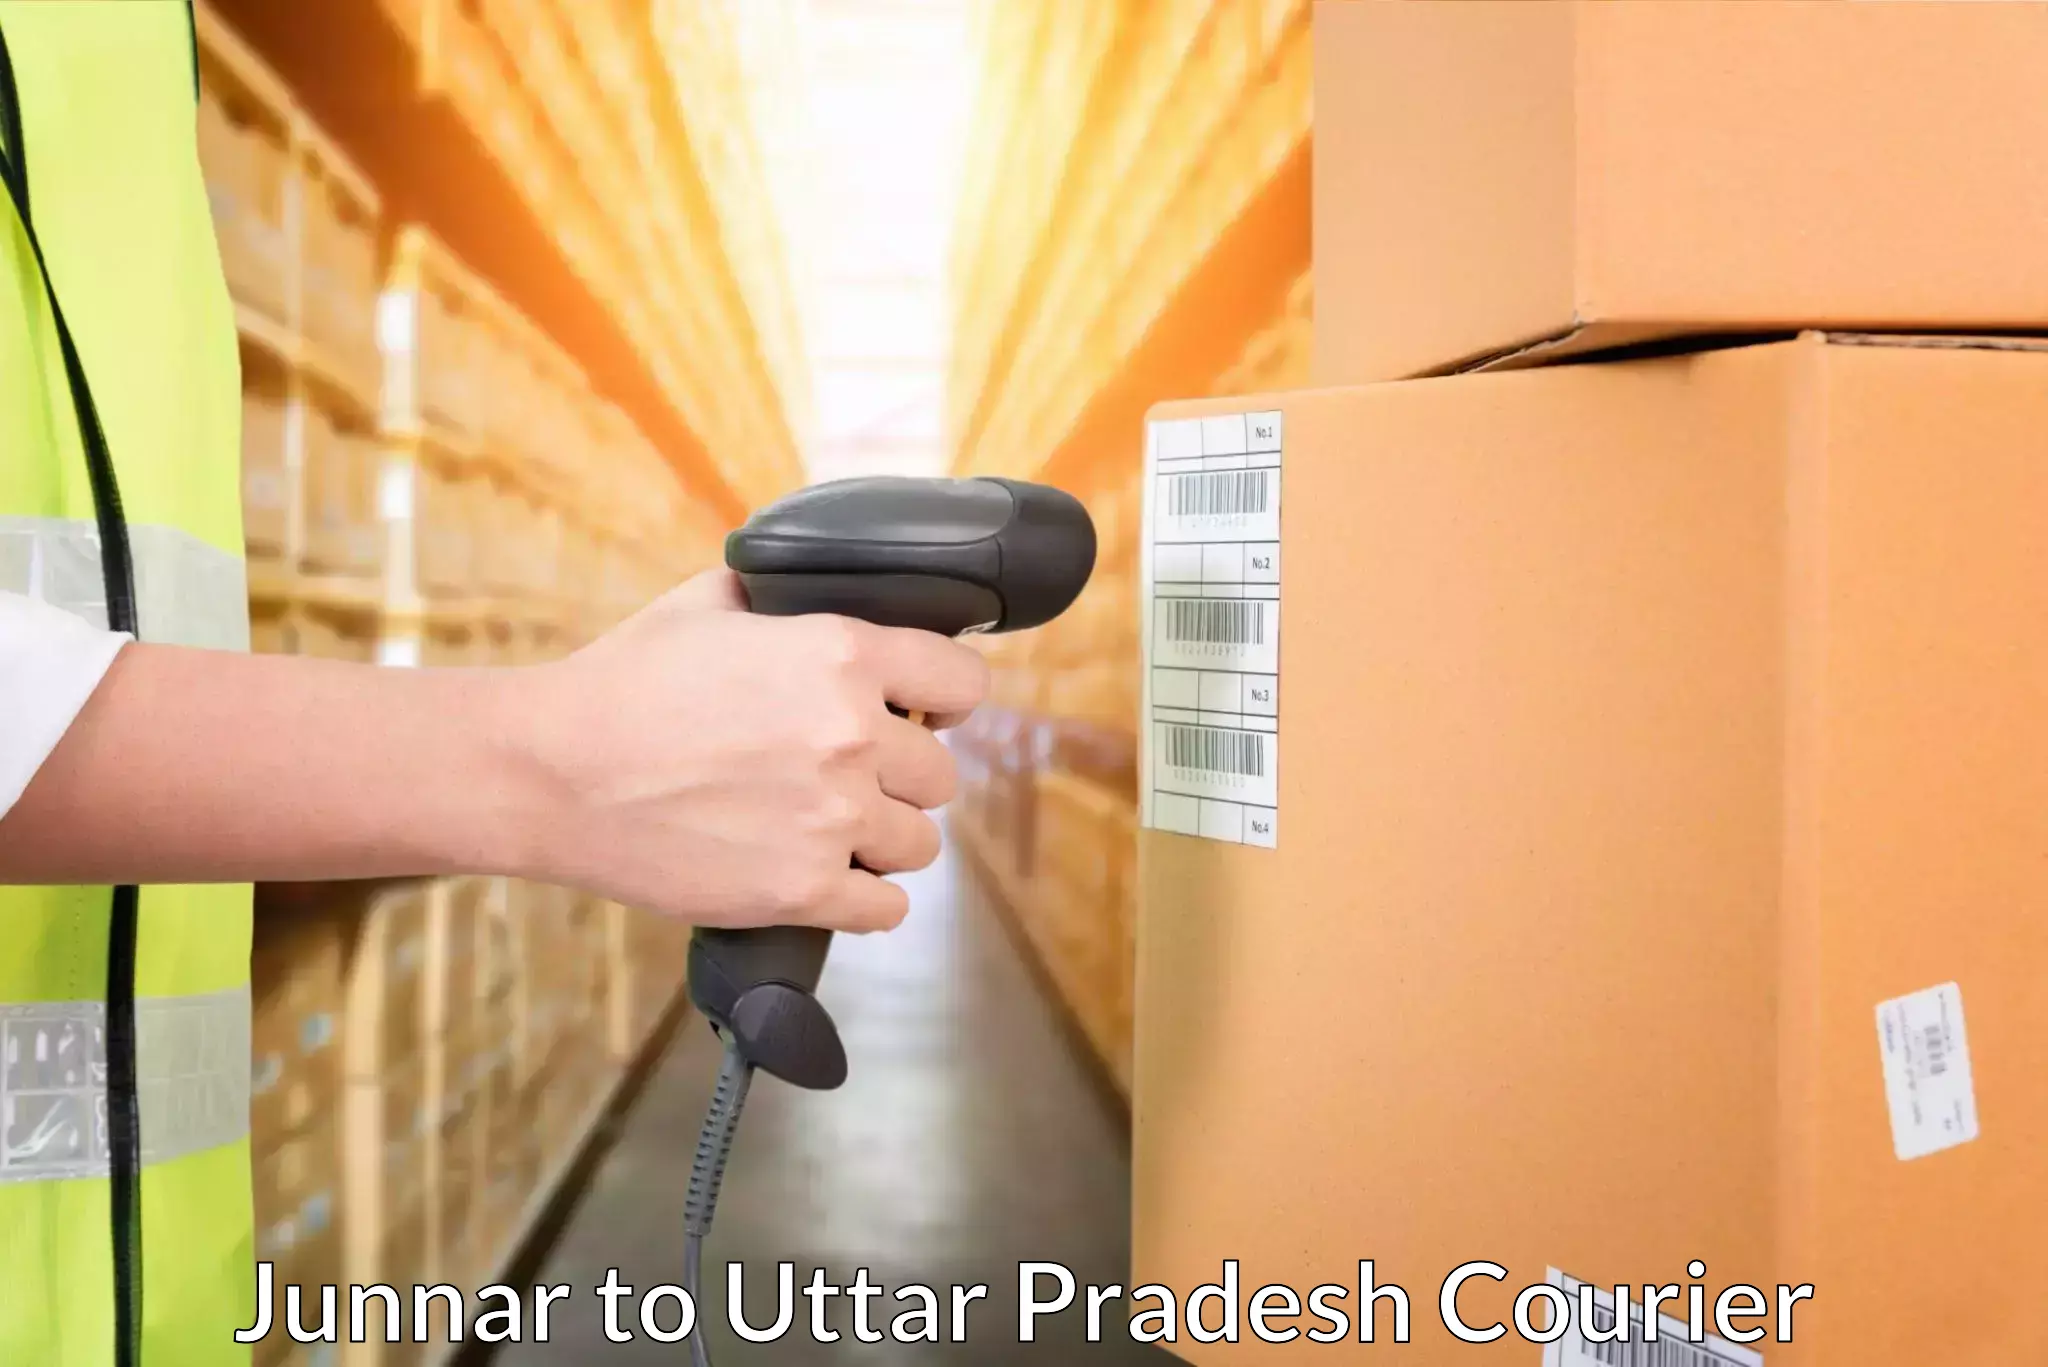 Automated parcel services Junnar to Varanasi